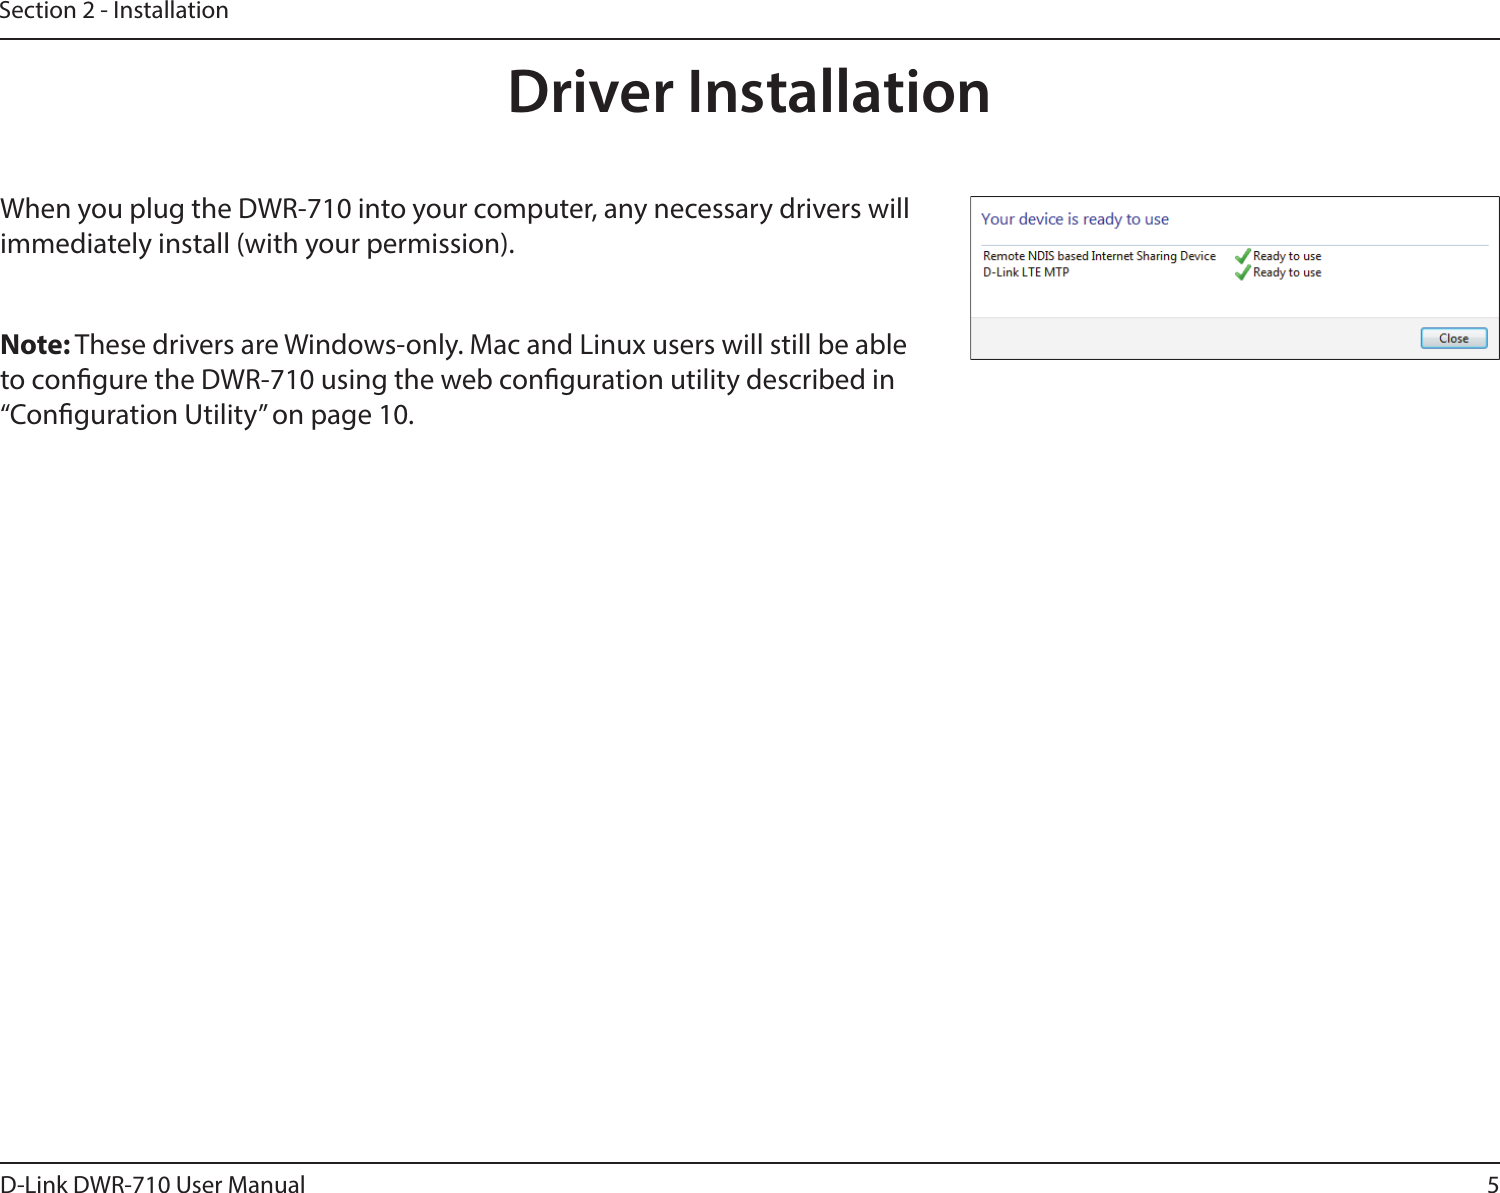 5D-Link DWR-710 User ManualSection 2 - InstallationDriver InstallationWhen you plug the DWR-710 into your computer, any necessary drivers will immediately install (with your permission).Note: These drivers are Windows-only. Mac and Linux users will still be able to congure the DWR-710 using the web conguration utility described in “Conguration Utility” on page 10.